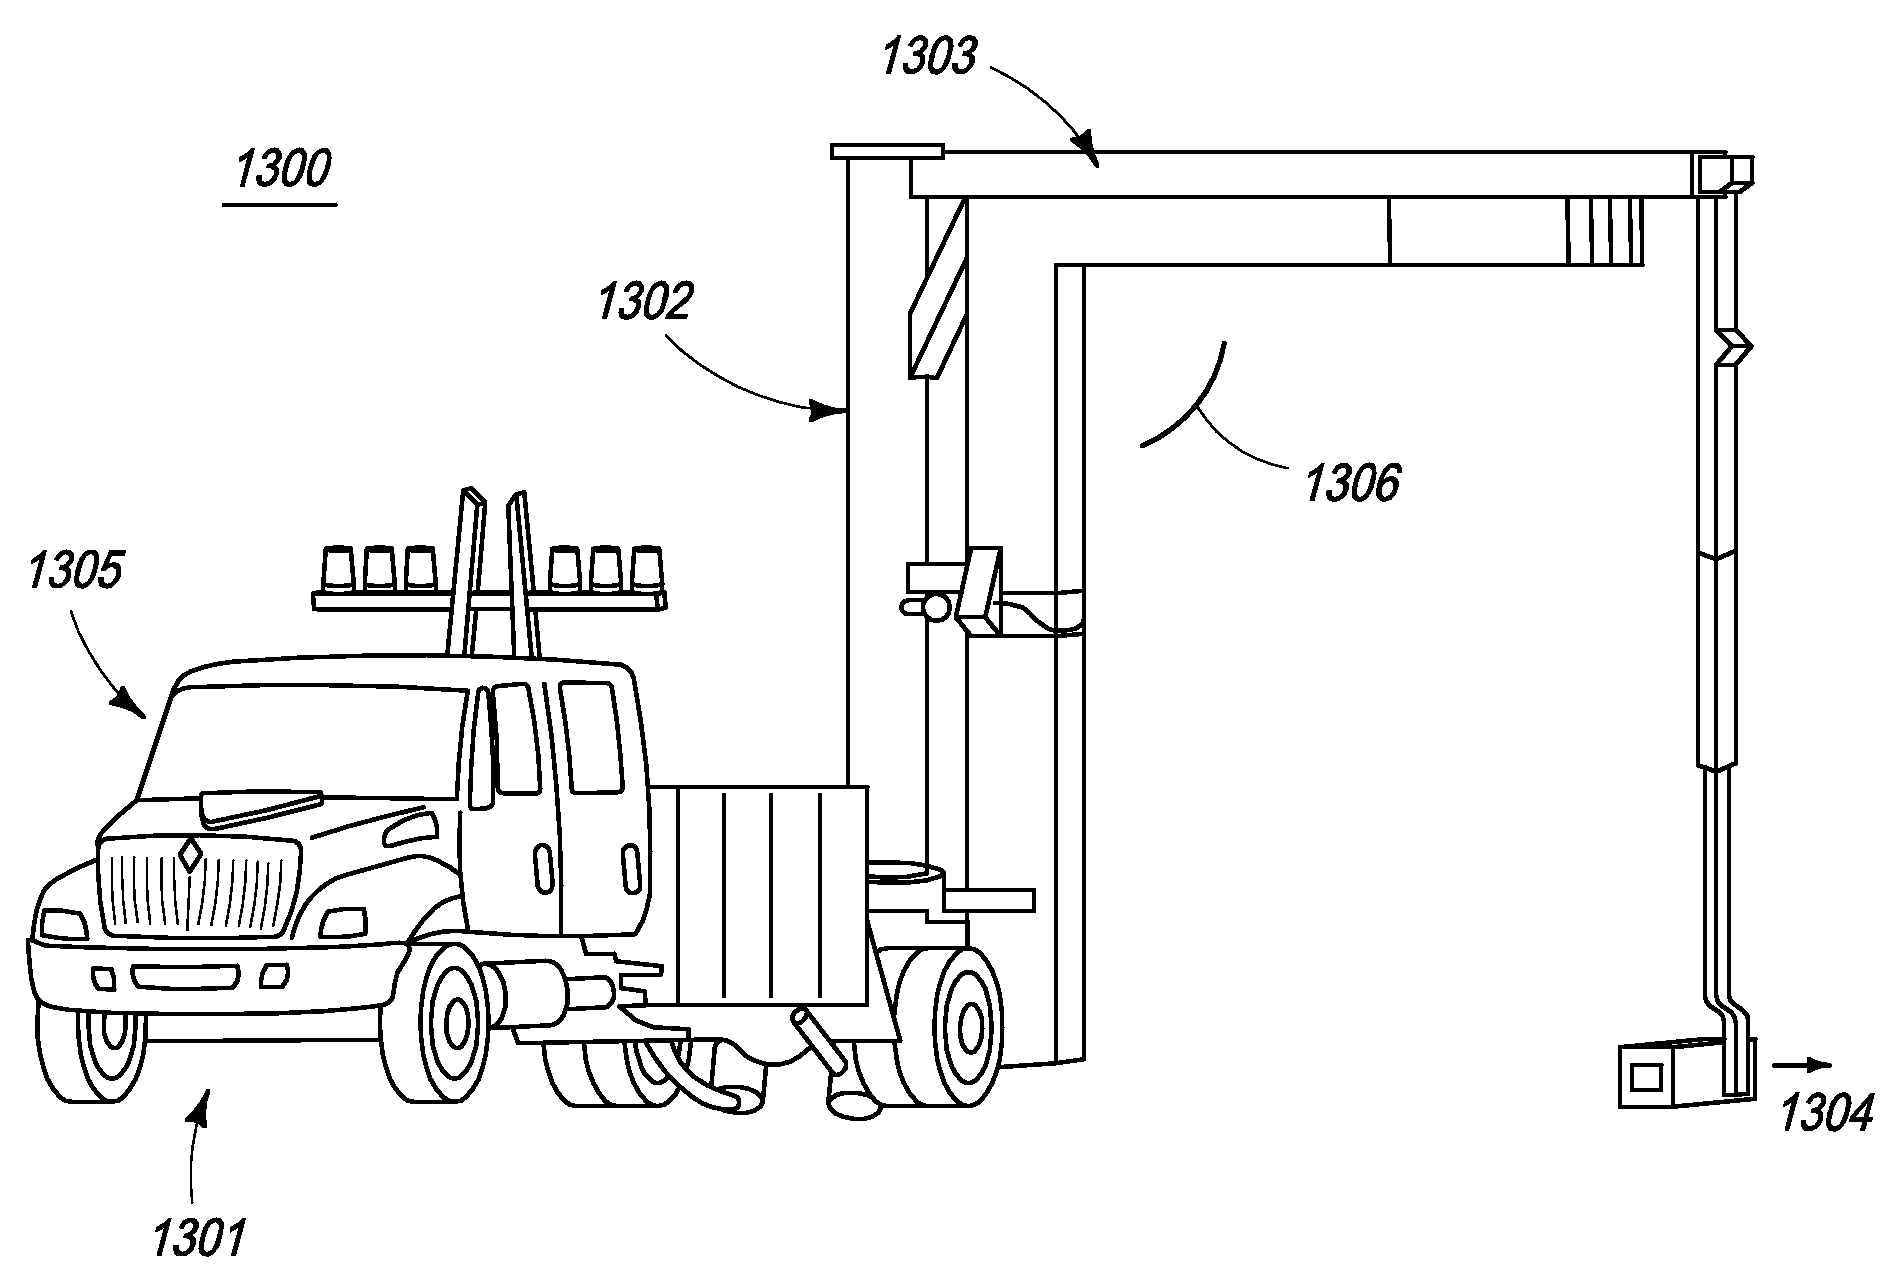 Self-Contained Mobile Inspection System and Method